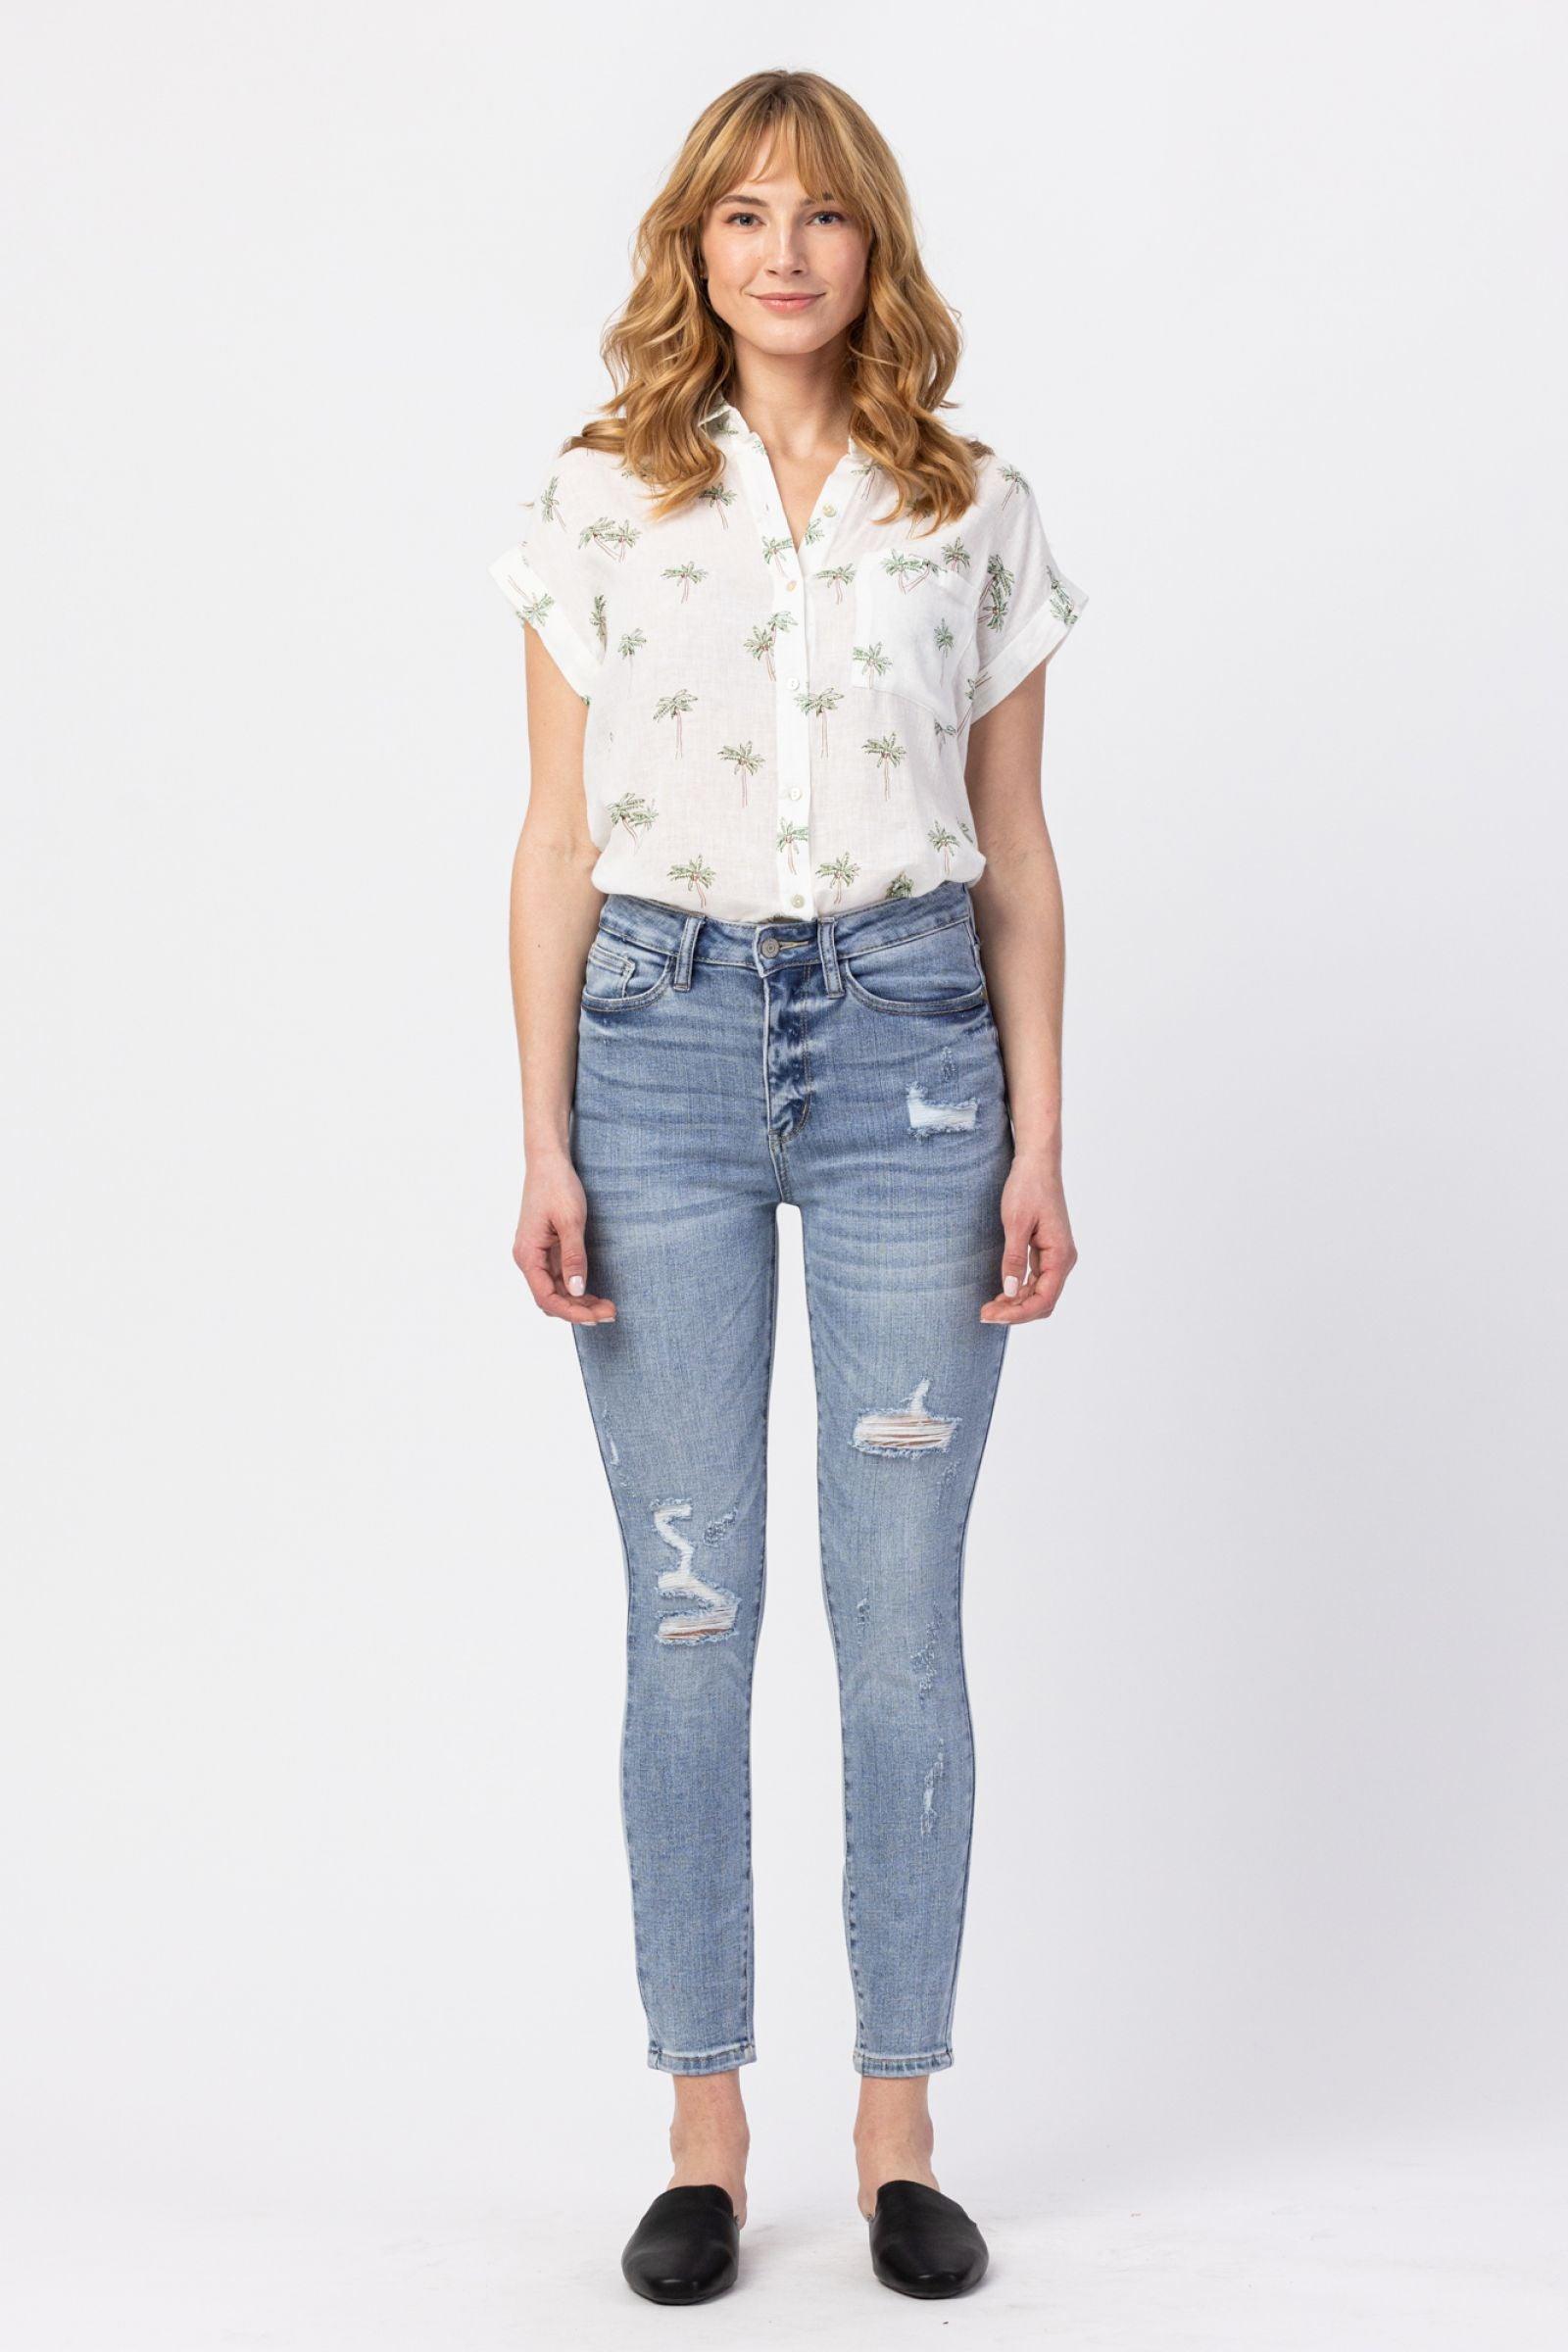 Judy Blue Skinny Ankle Jeans - Strawberry Moon Boutique